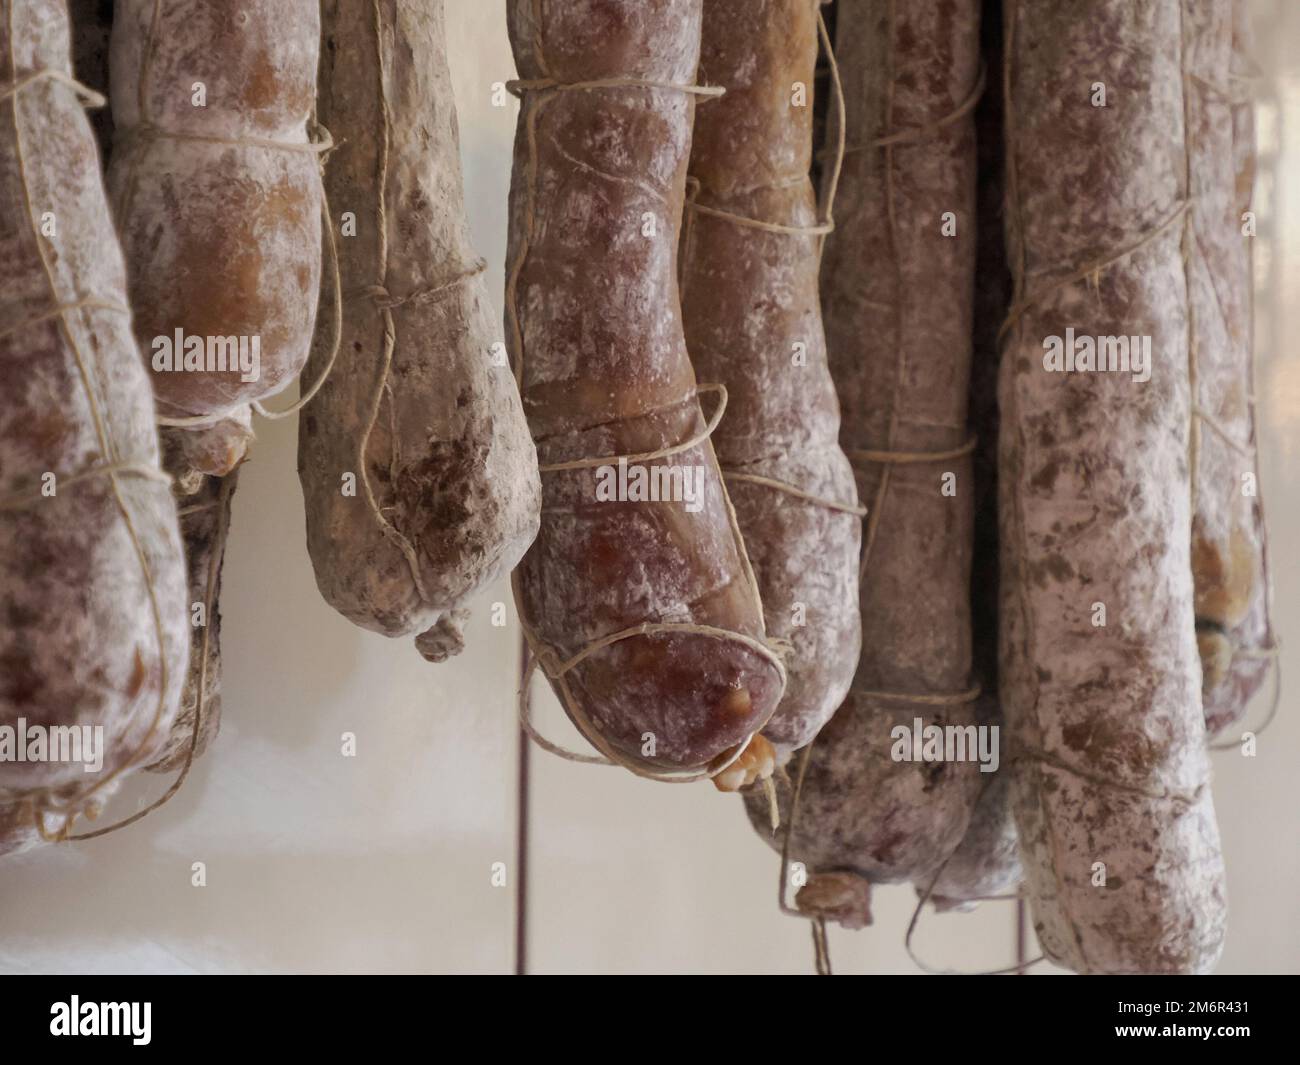 at photography 28 market - - Page and images Salami Alamy stock hi-res the